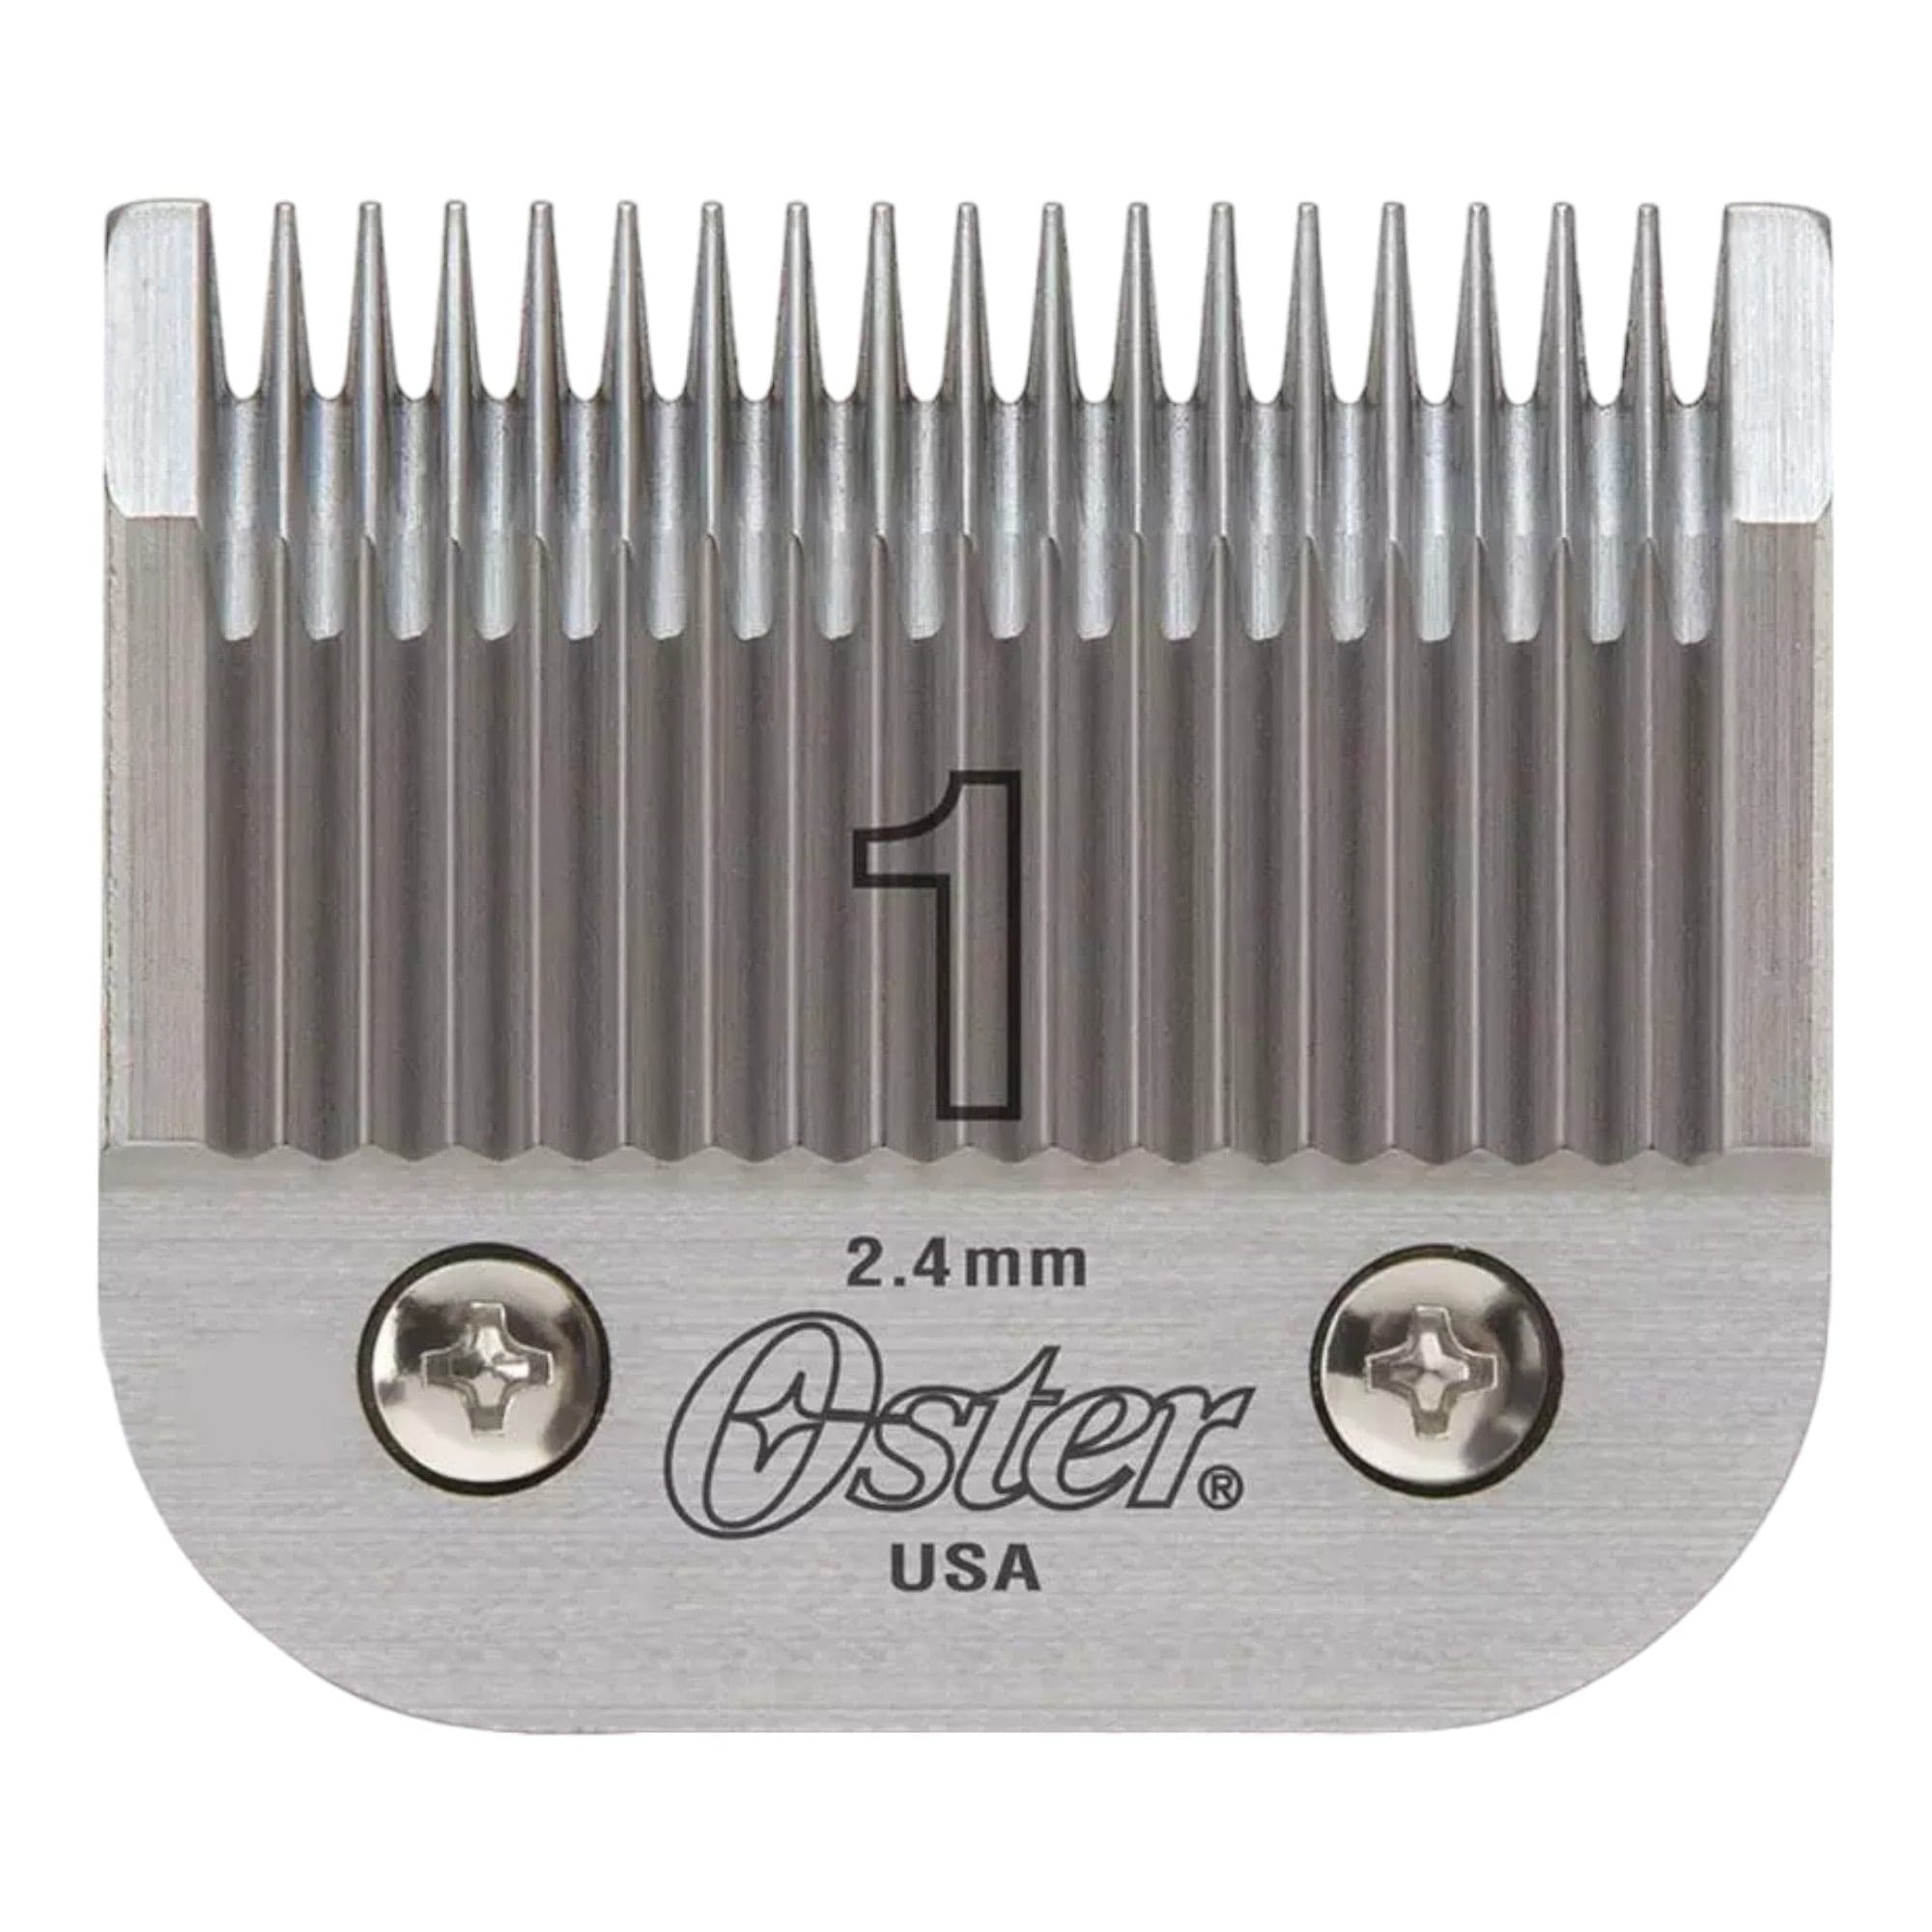 Oster - 076918-086 Detachable Blade Size 1 - 2.4mm